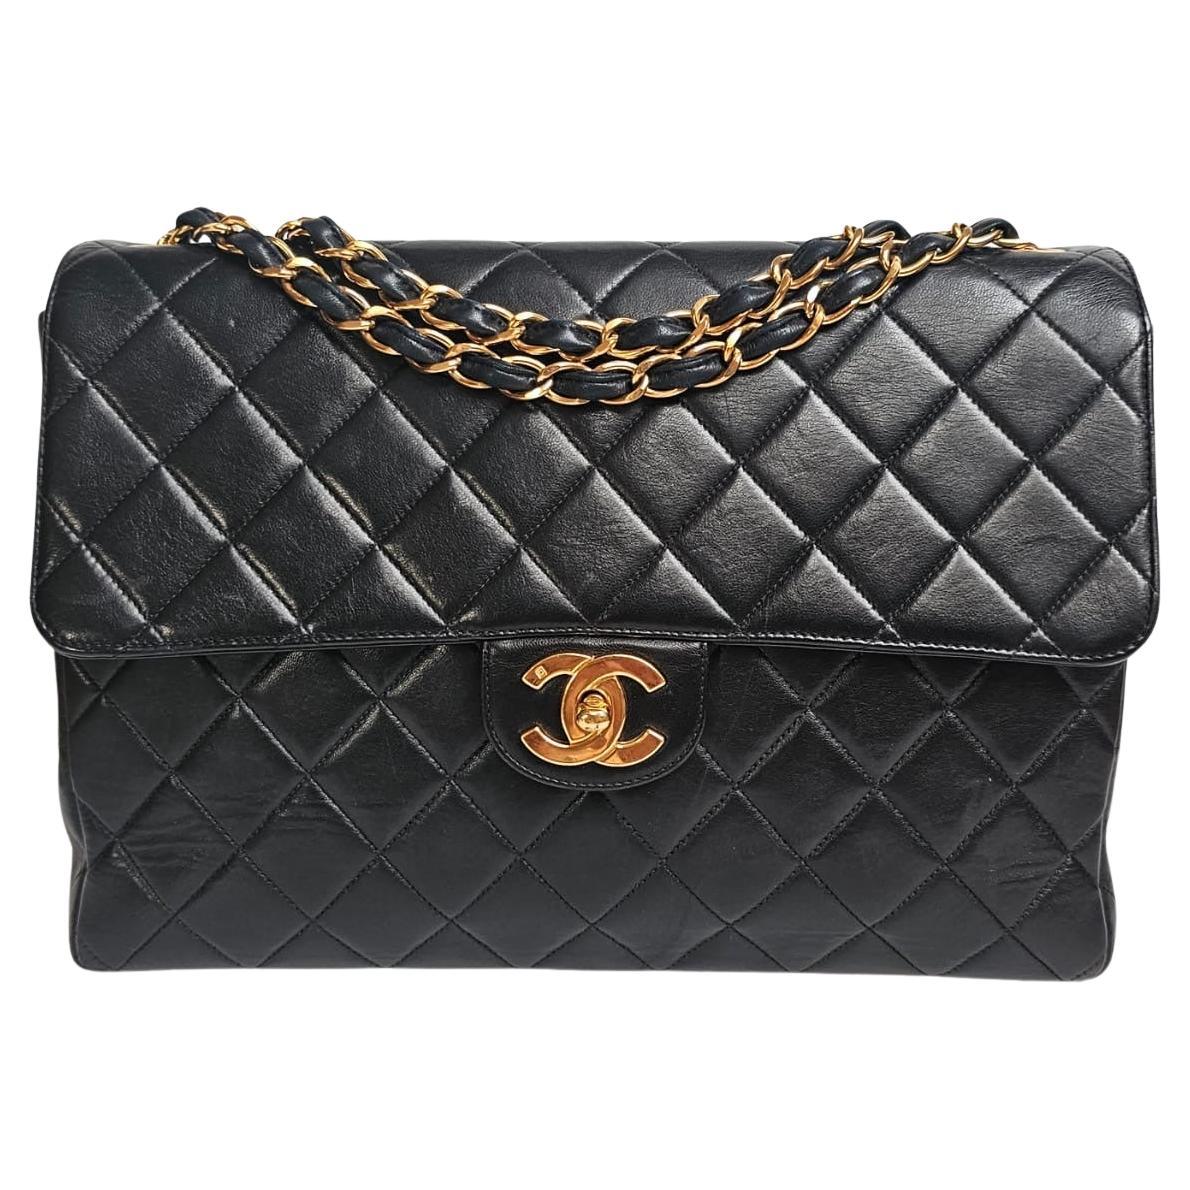 Vintage 1990s Chanel Jumbo Lambskin Quilted Jumbo Flap Bag For Sale